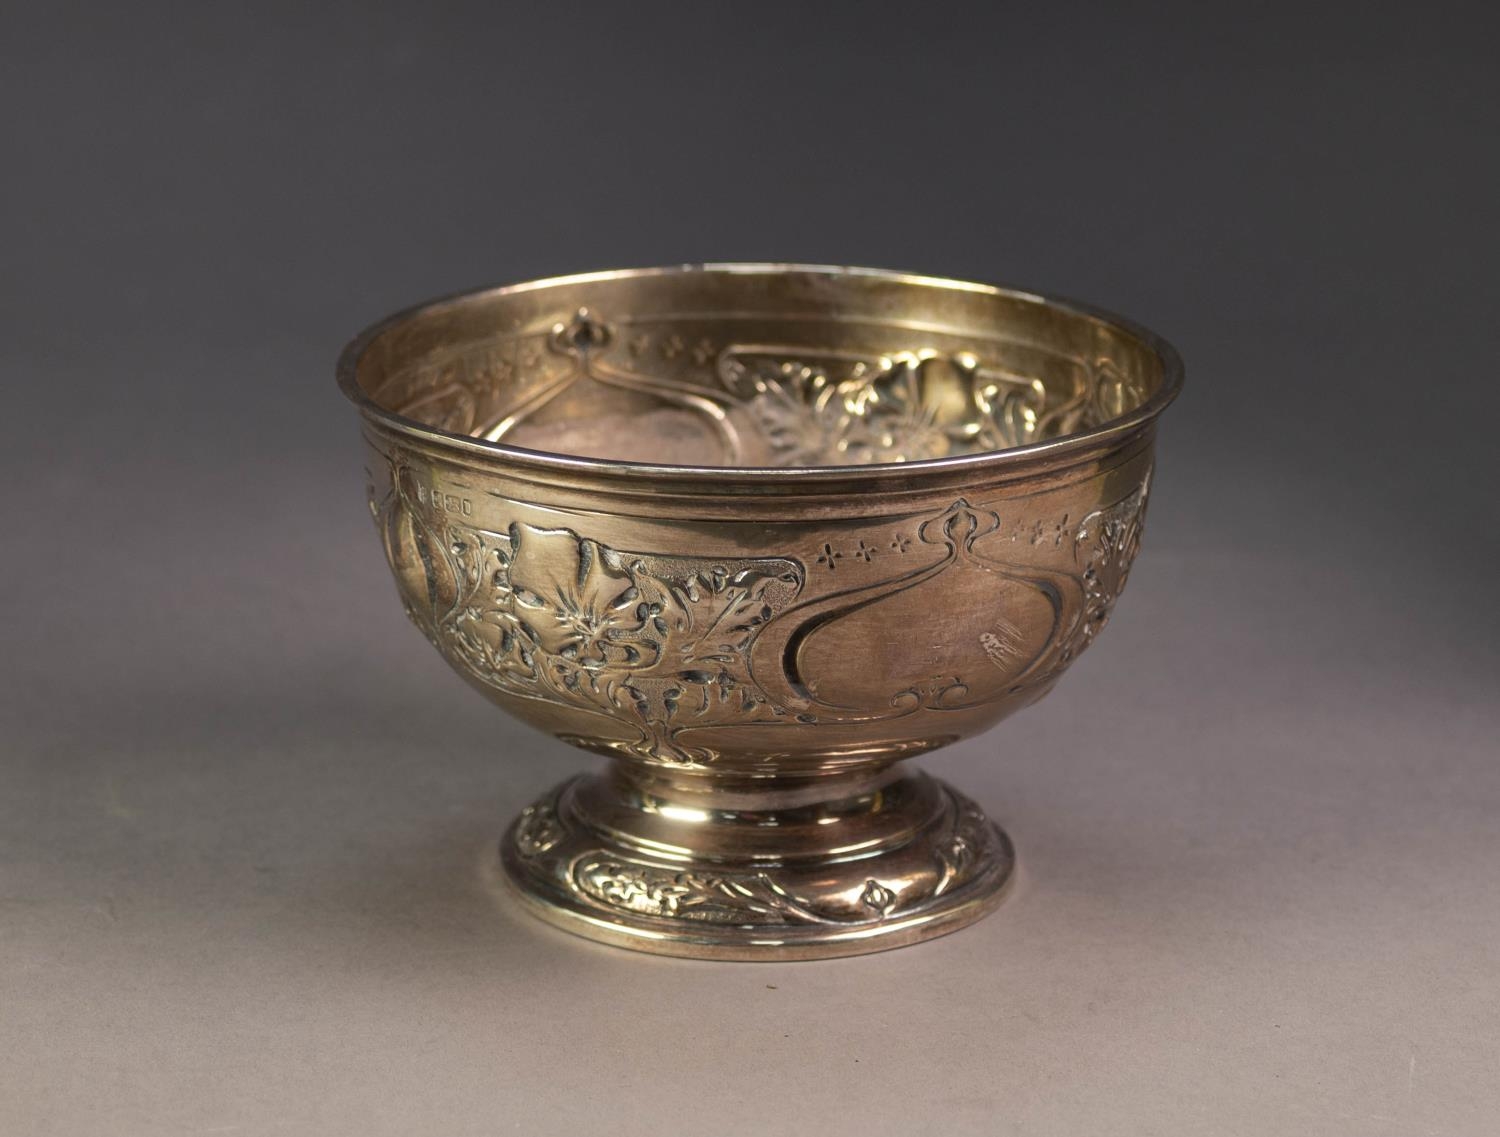 EDWARD VII ART NOUVEAU SILVER PEDESTAL ROSE BOWL, repousse with foliate scroll panels and vacant